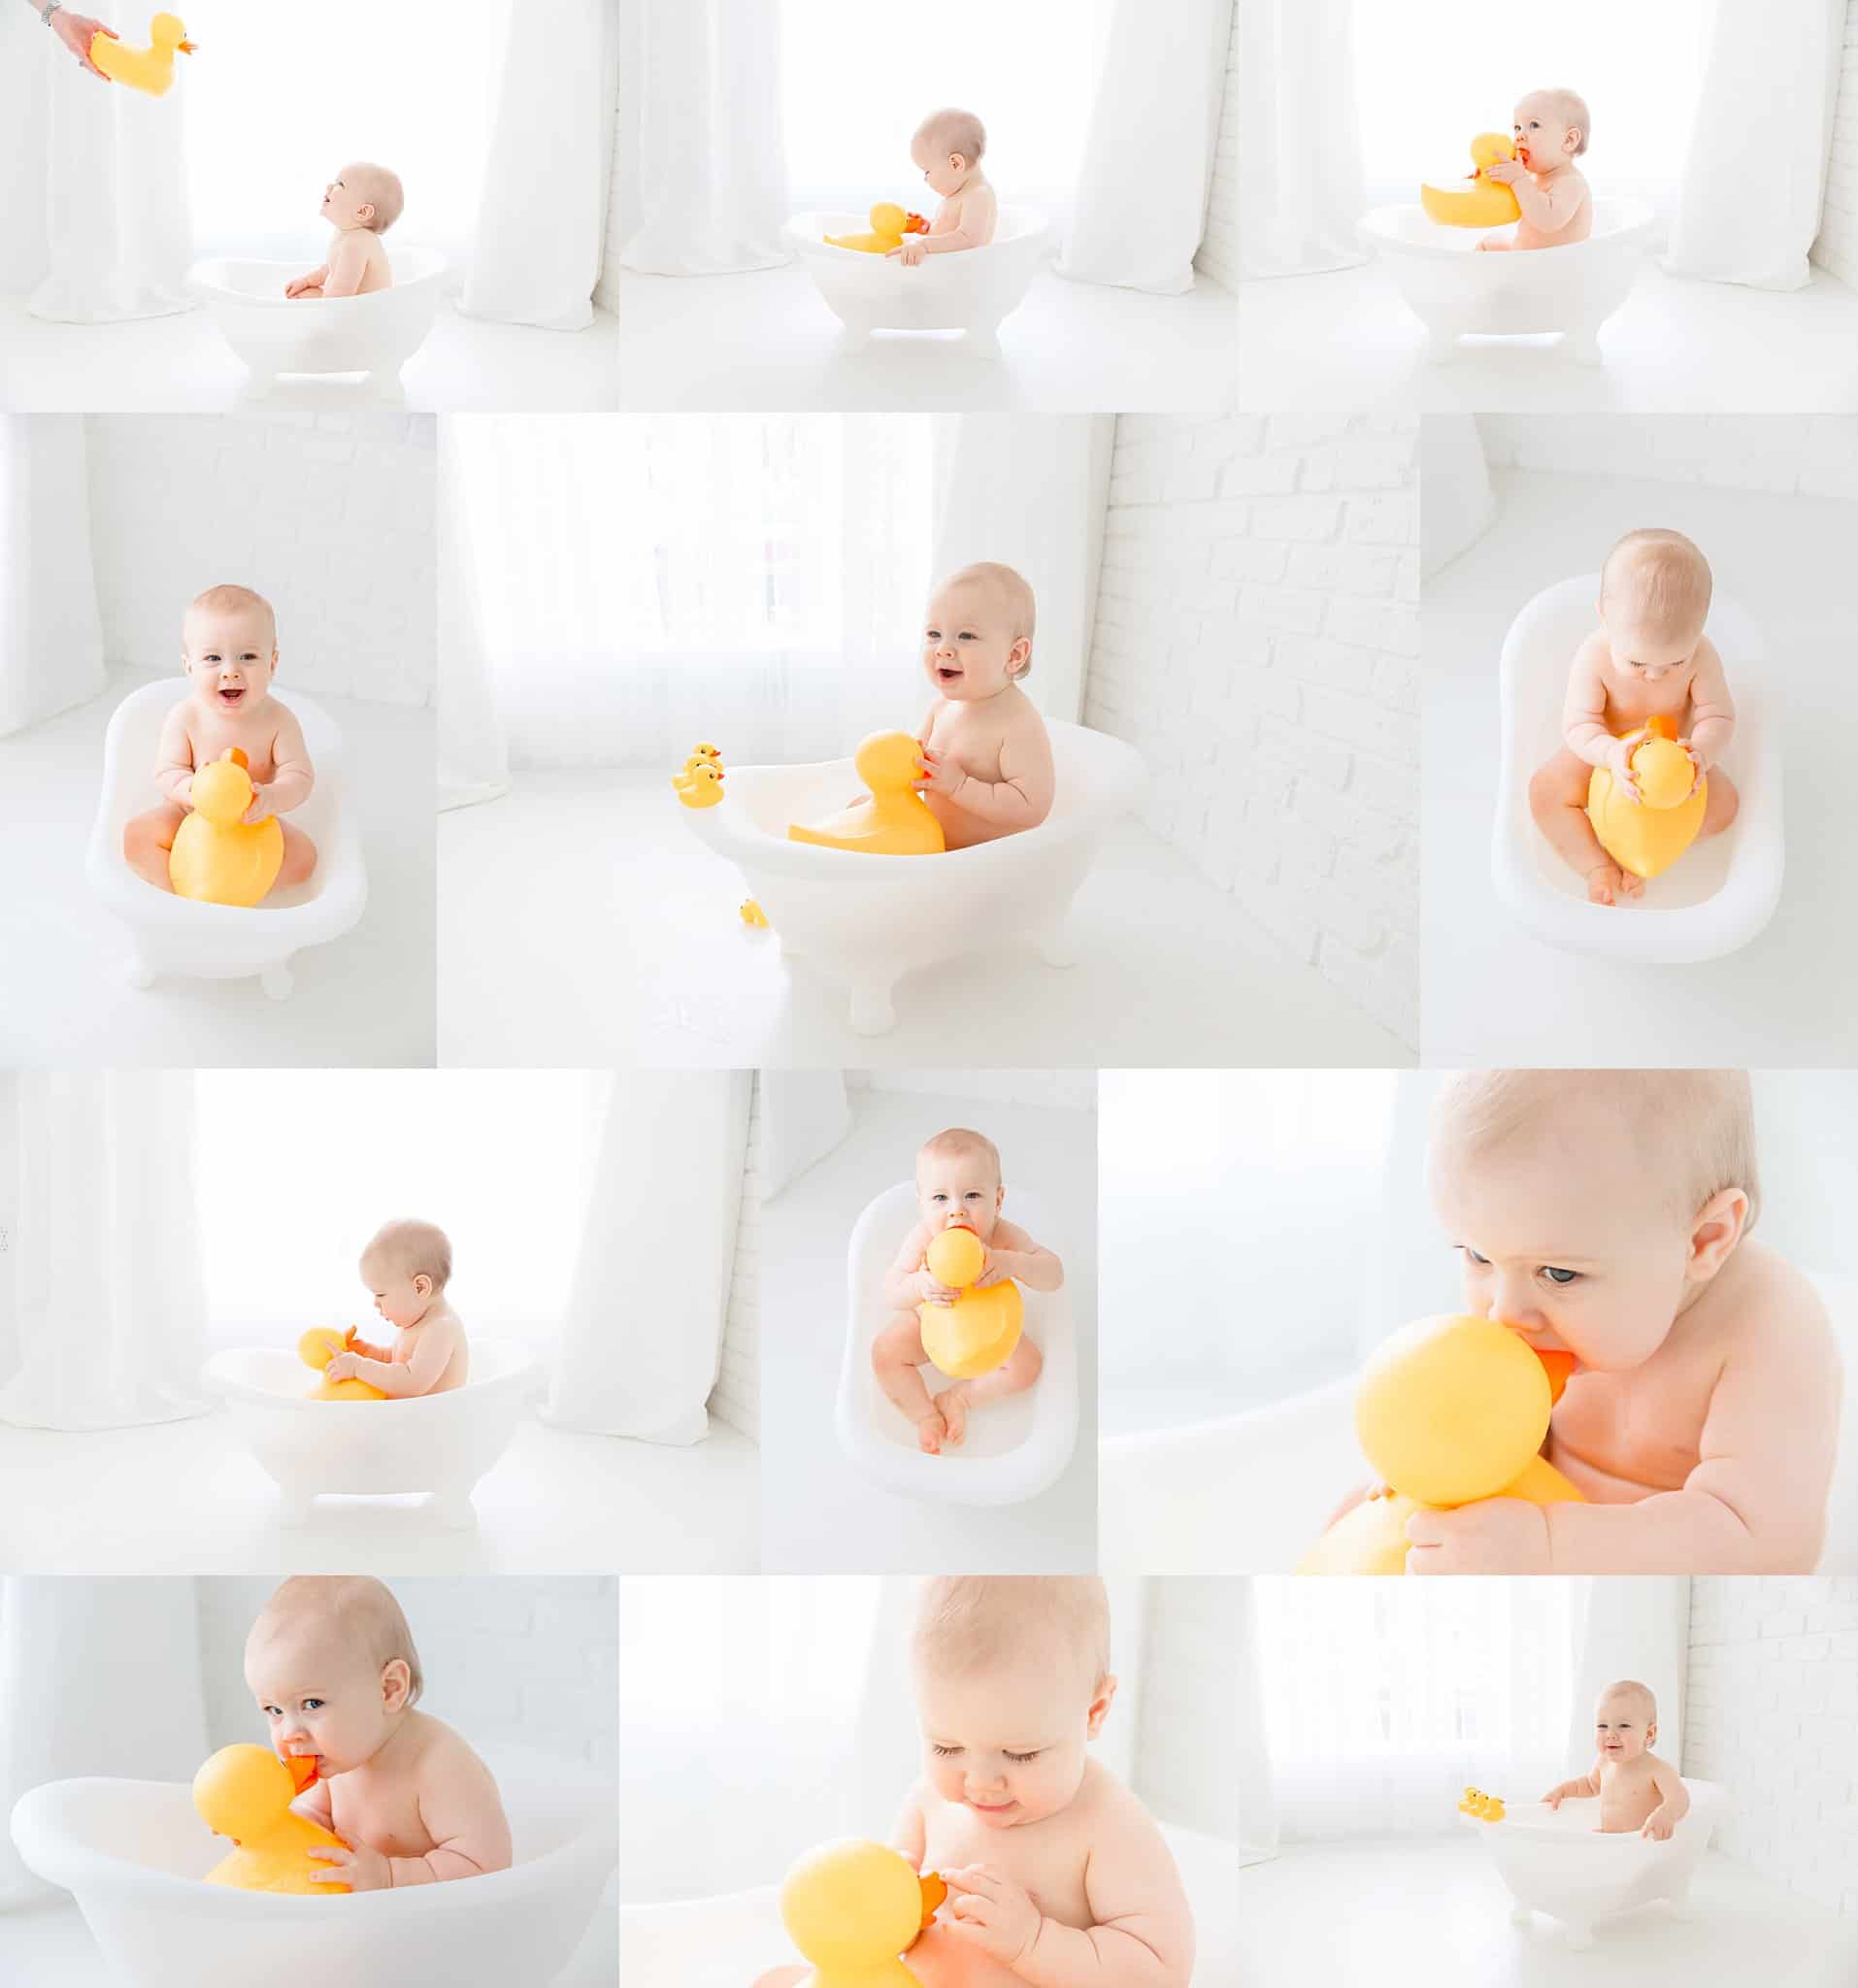 Baby being photographed in a bath tub with extra large rubber duck.